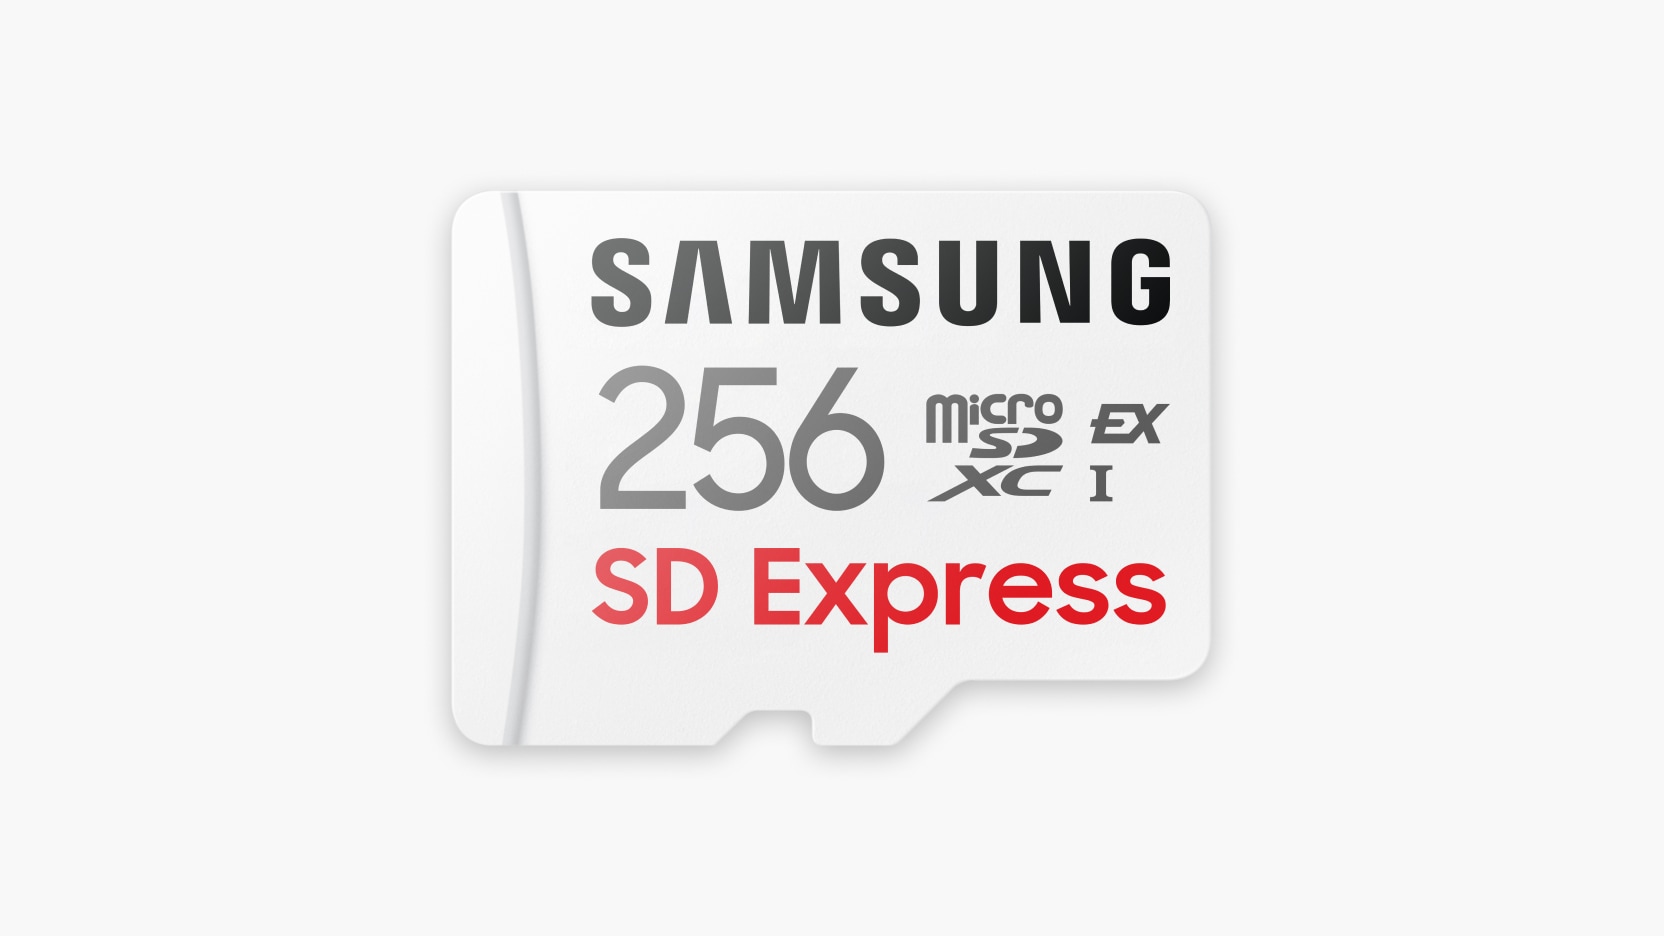 Samsung’s New microSD Cards Bring High Performance and Capacity for the New Era in Mobile Computing and On-device AI